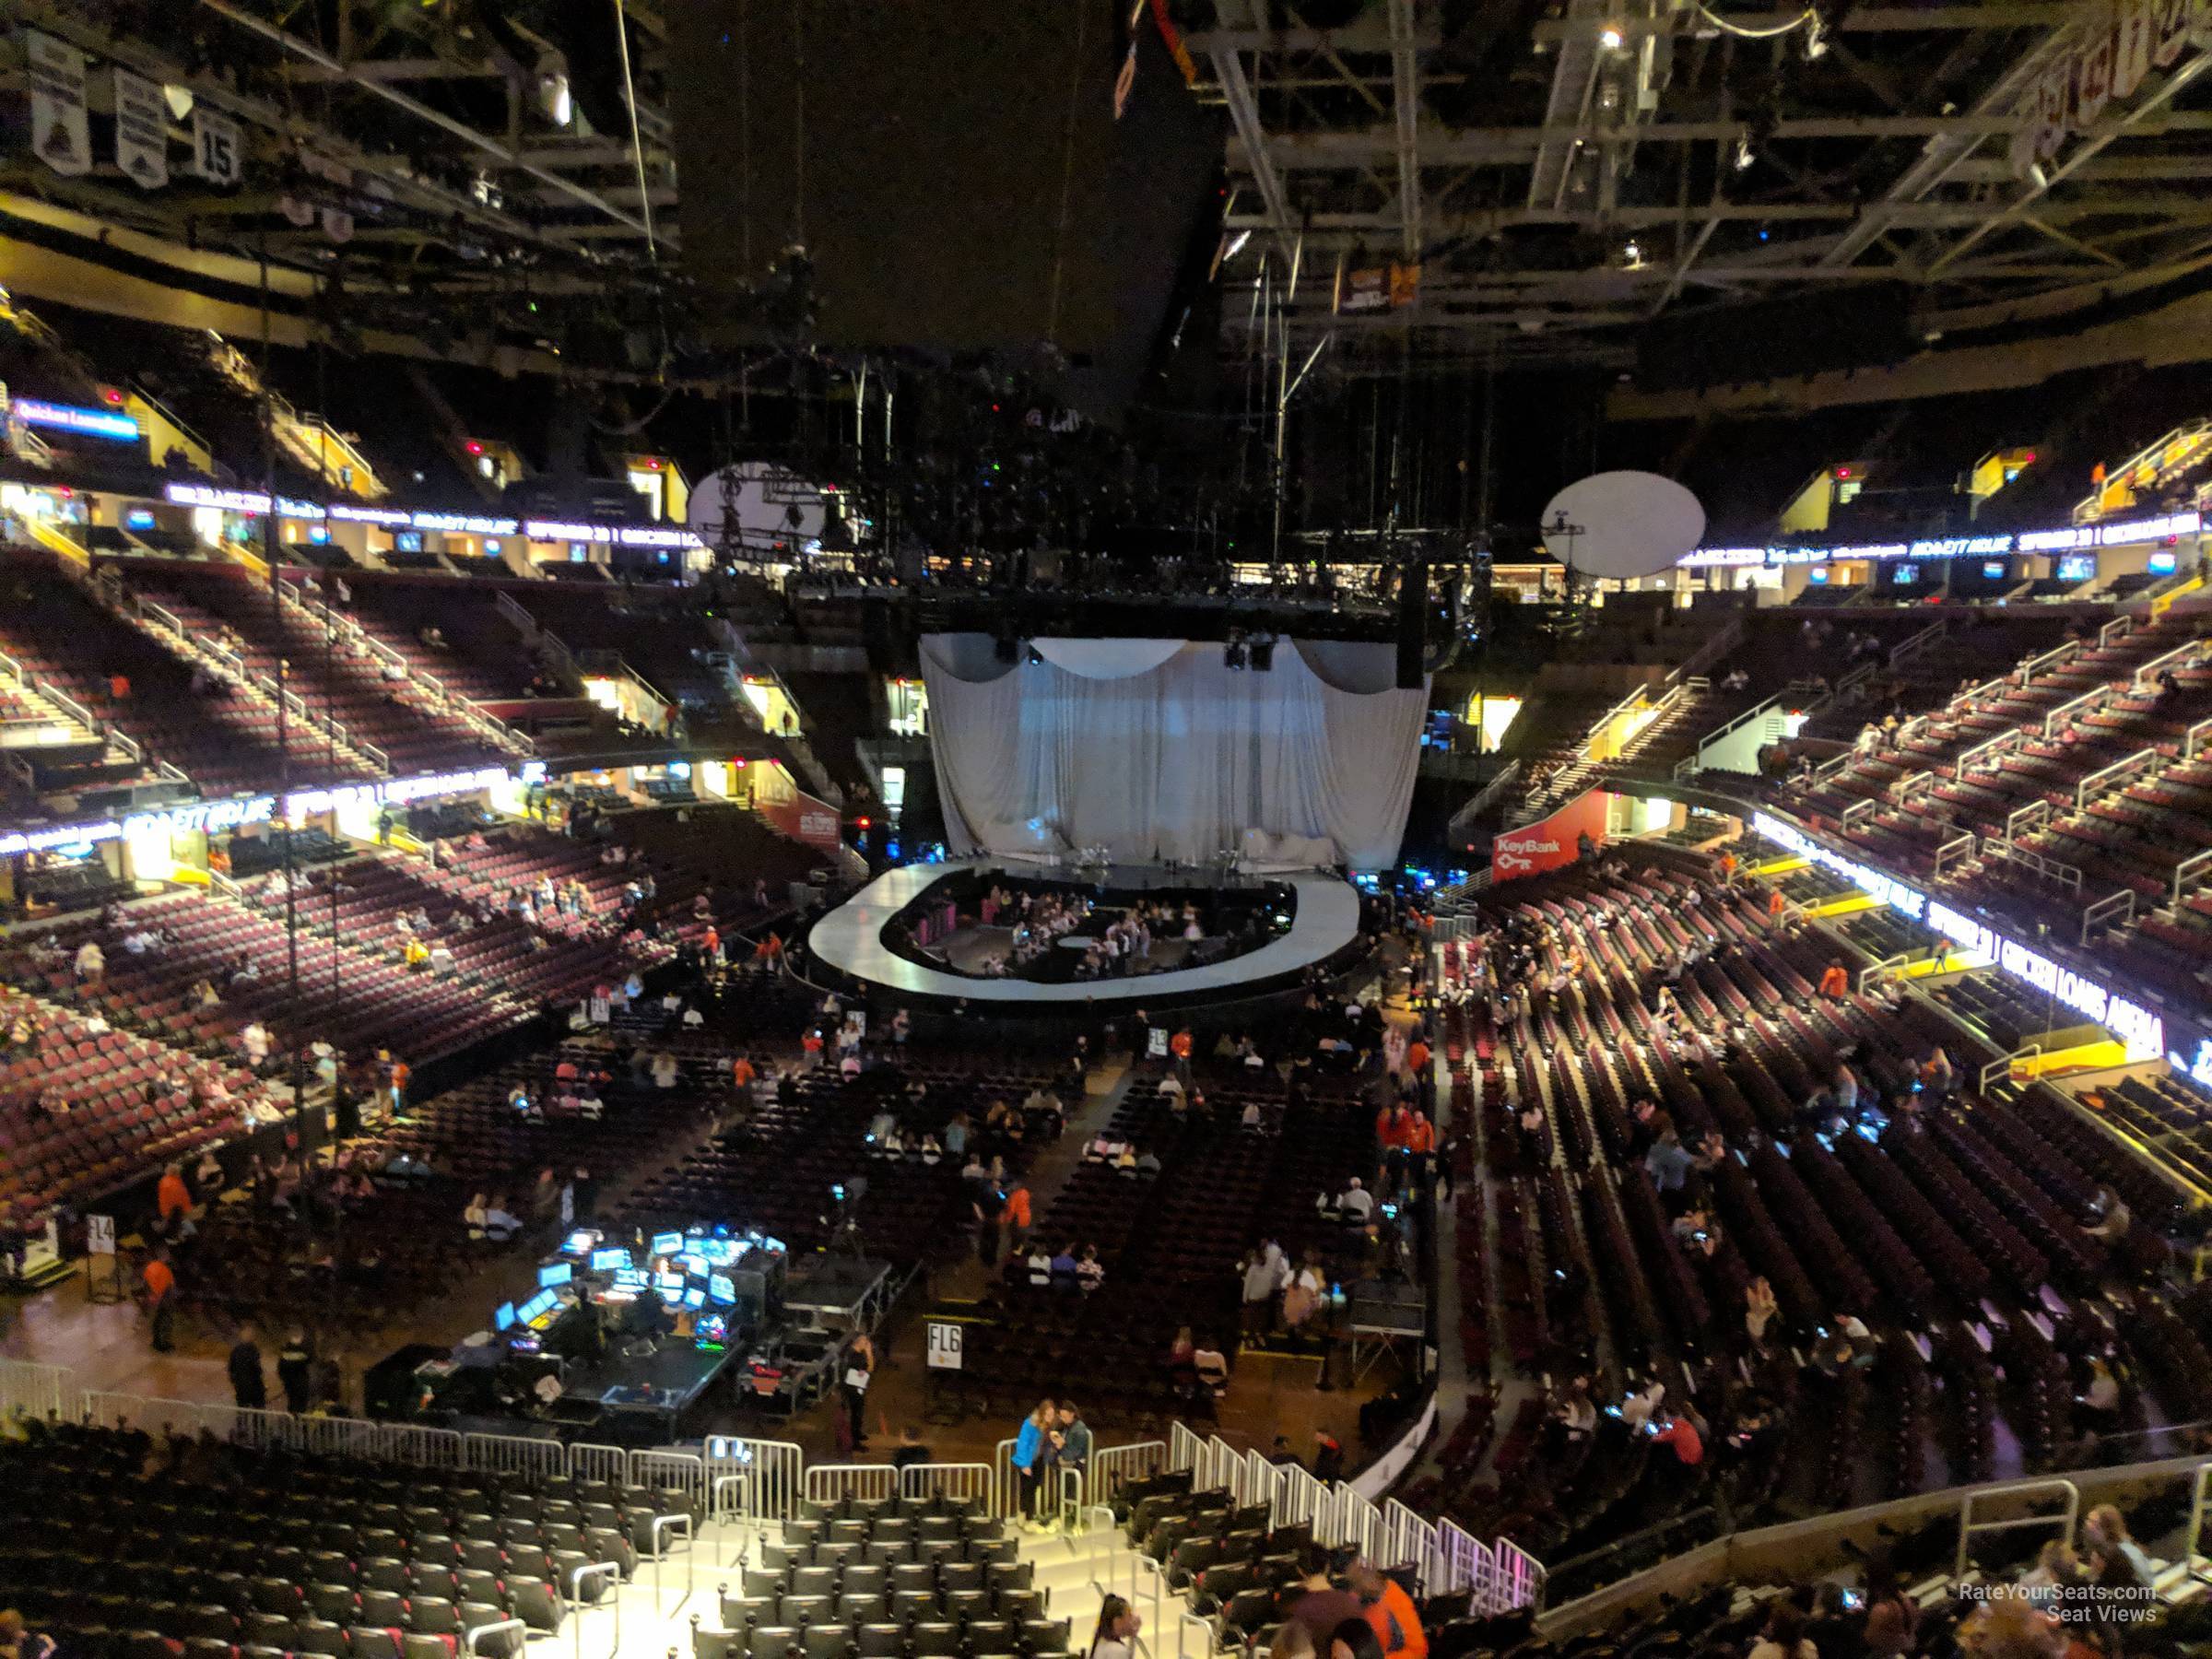 section m126, row 10 seat view  for concert - rocket mortgage fieldhouse